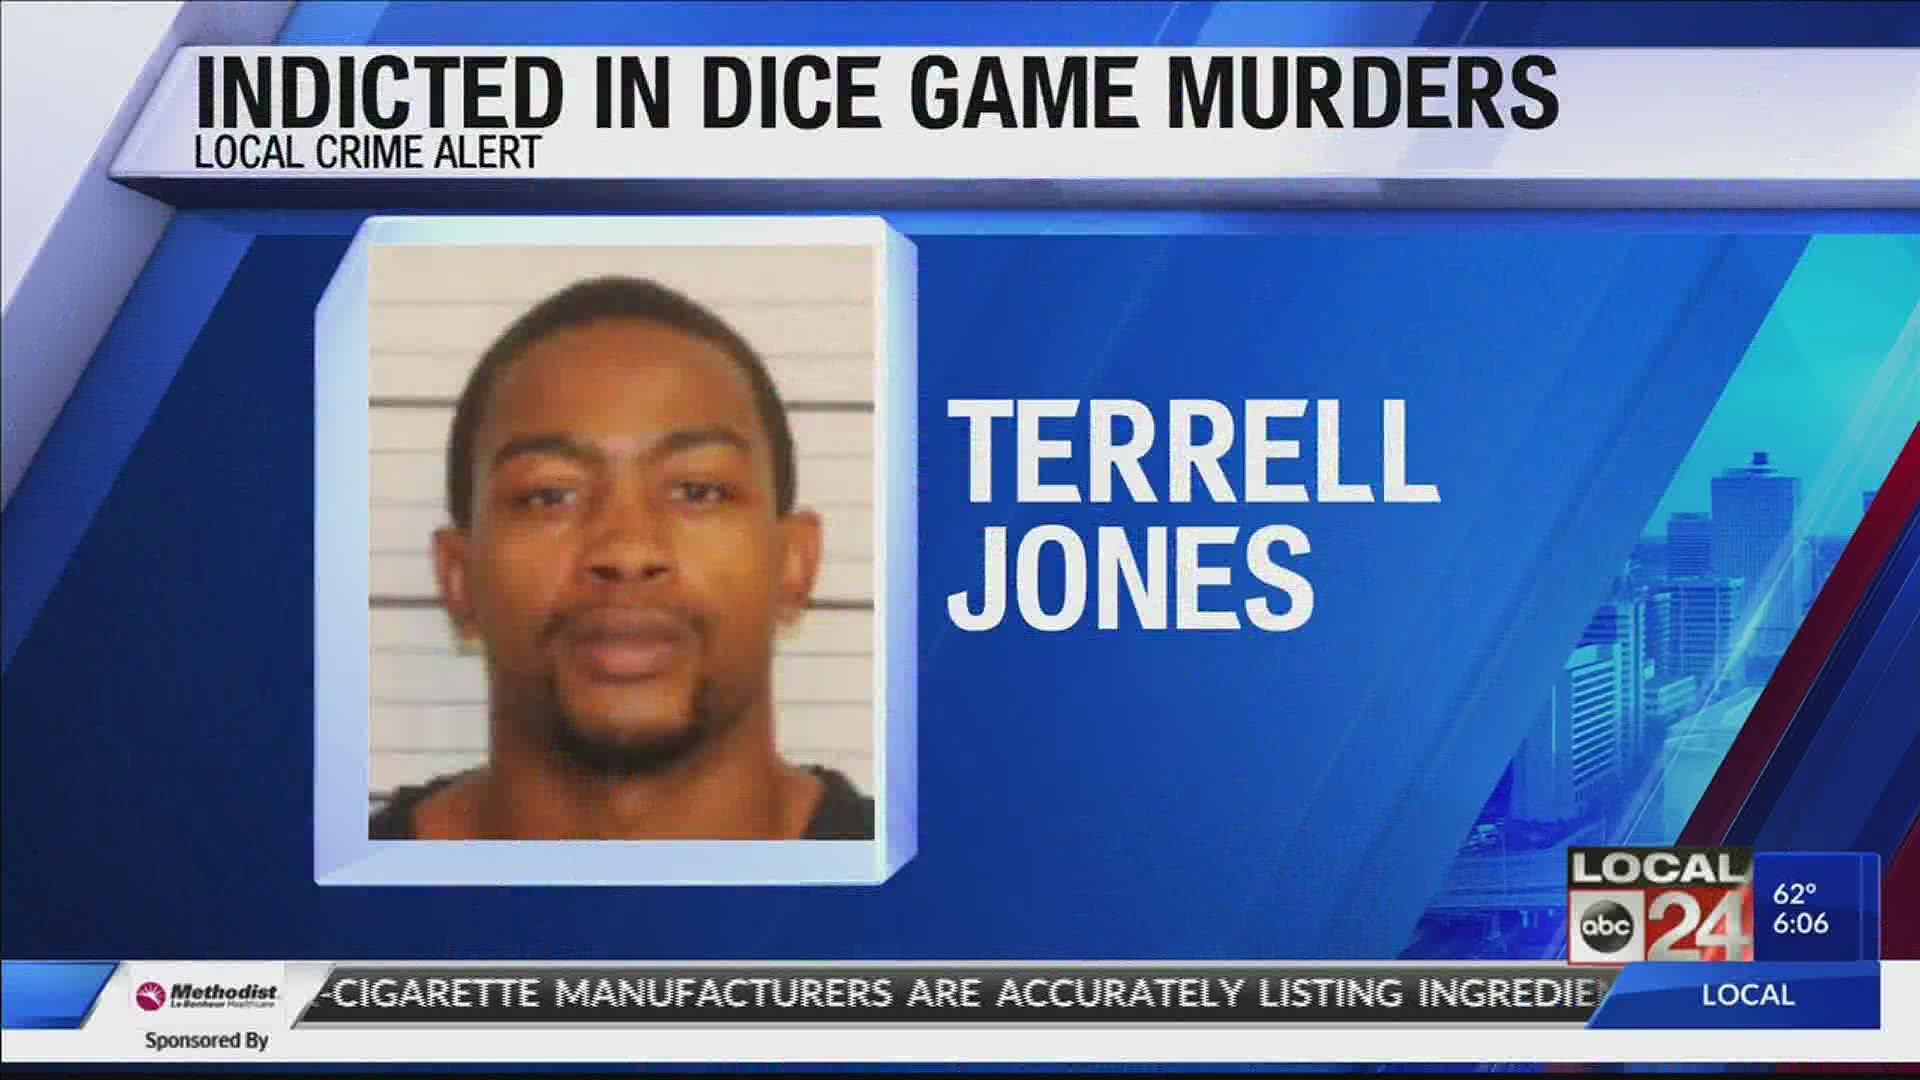 Terrell Jones is charged with murder, attempted murder, robbery, and more for the July shooting.